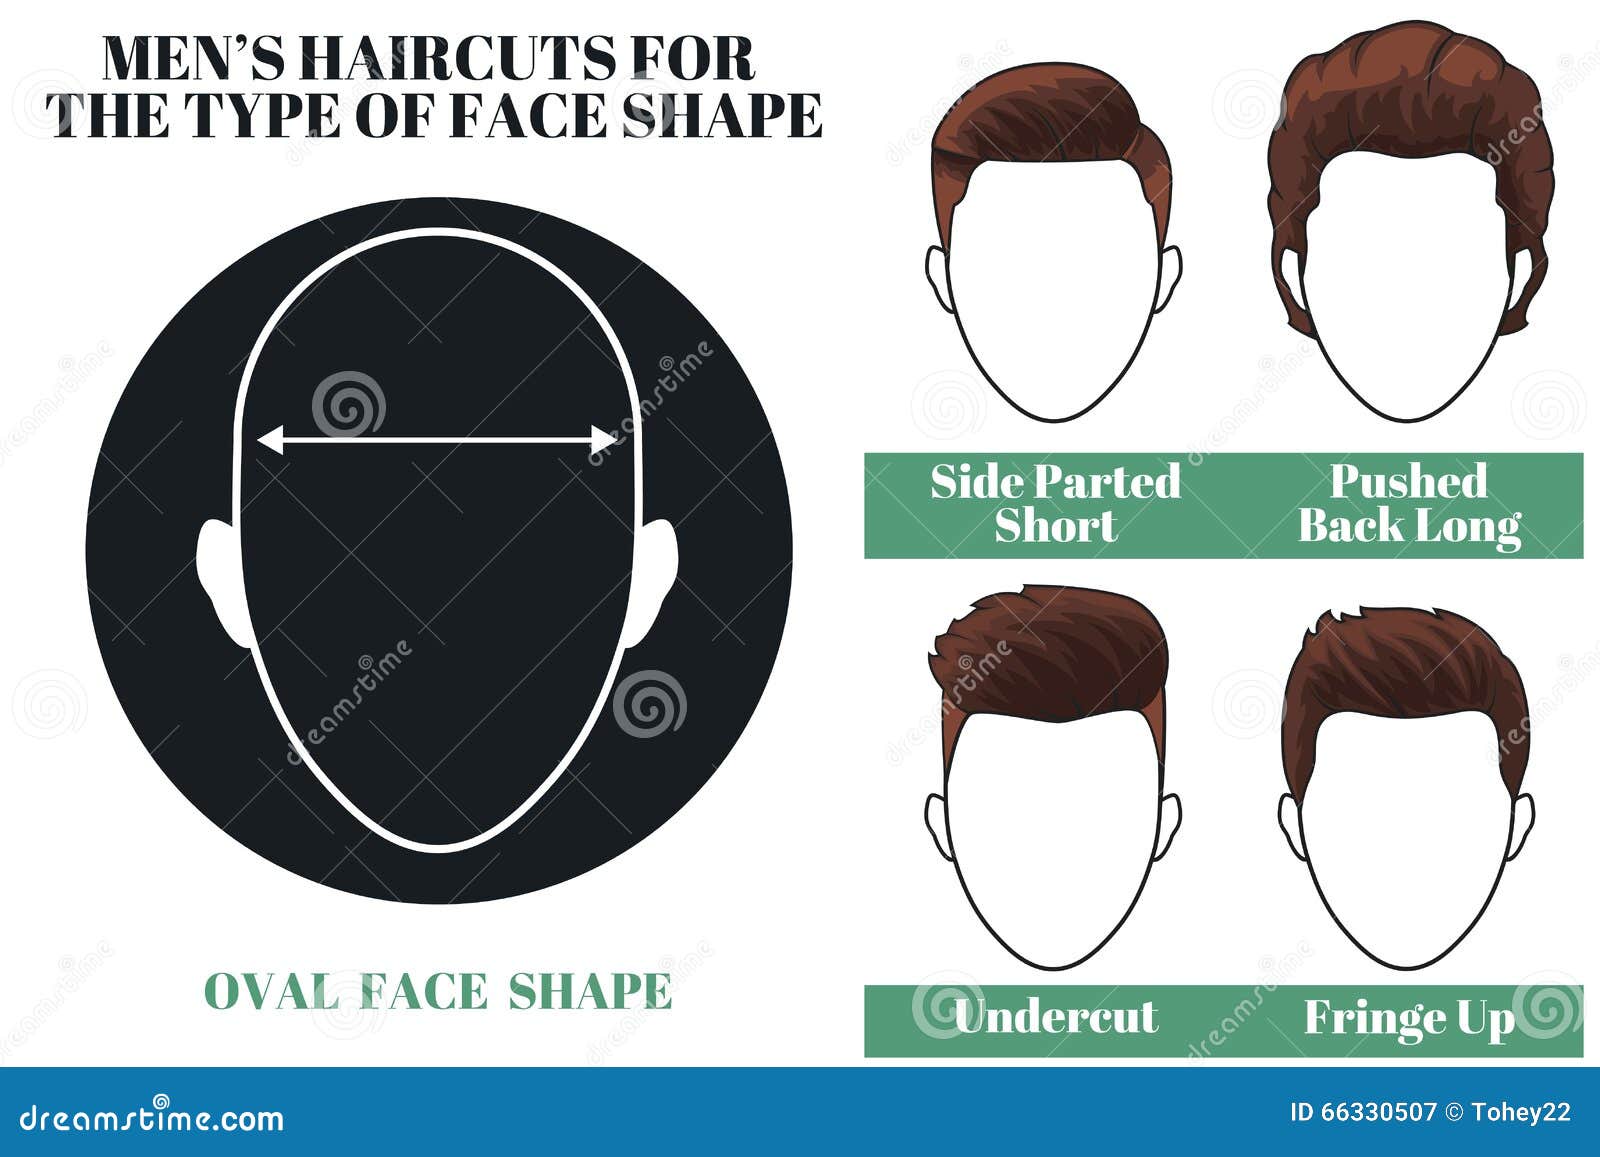 25 Trendy and Latest Oval Face Hairstyles for Men | Styles At Life